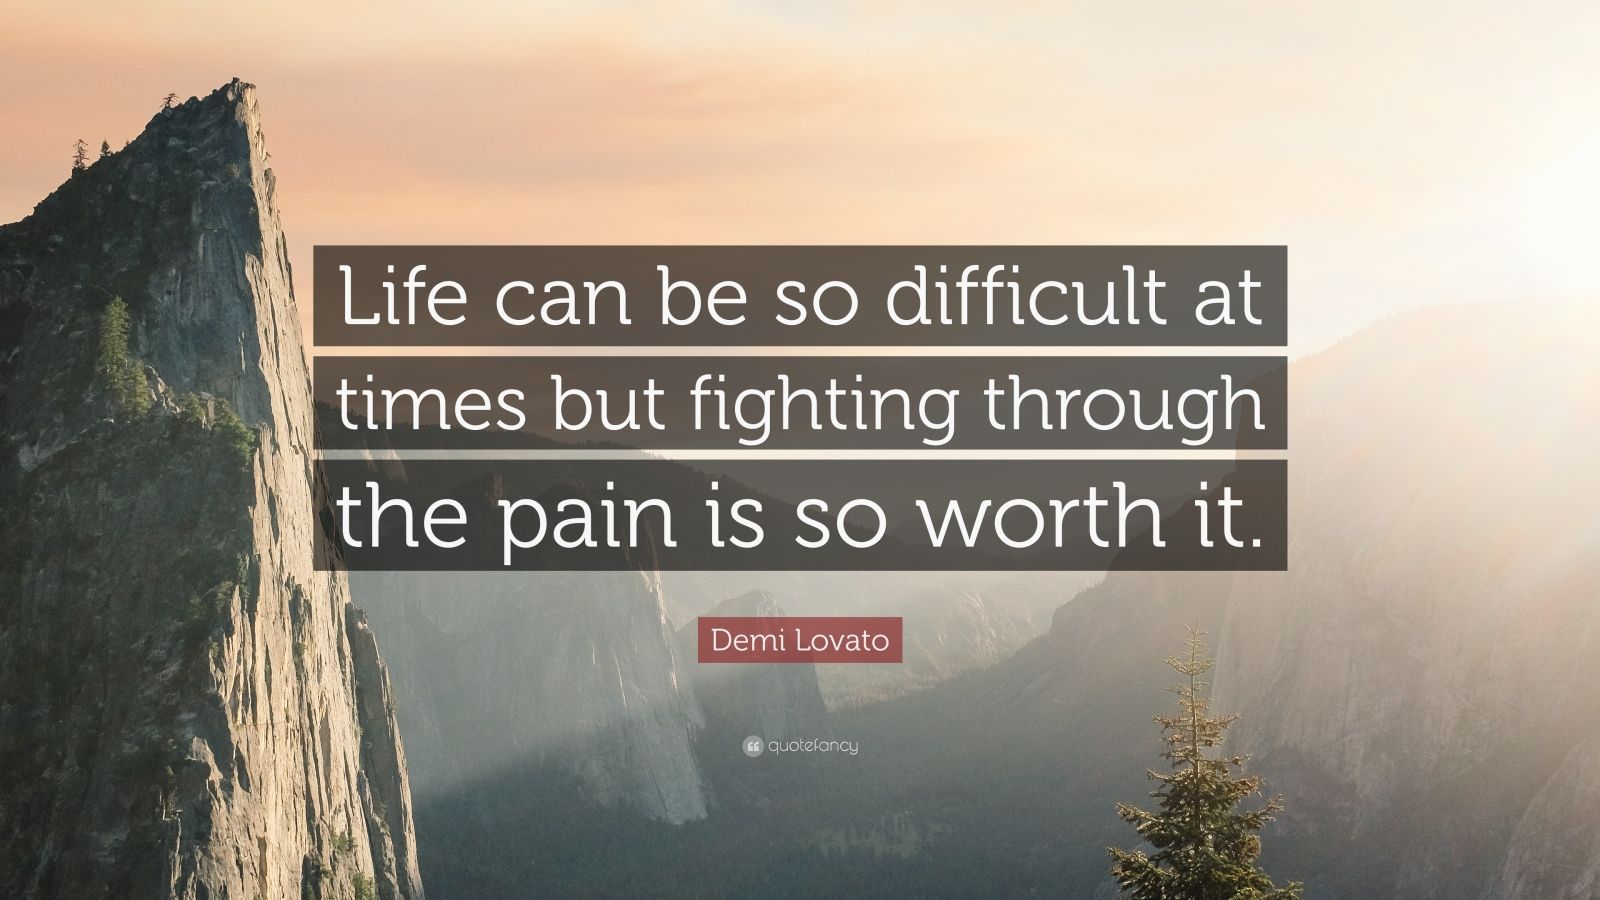 Demi Lovato Quote: “Life can be so difficult at times but fighting